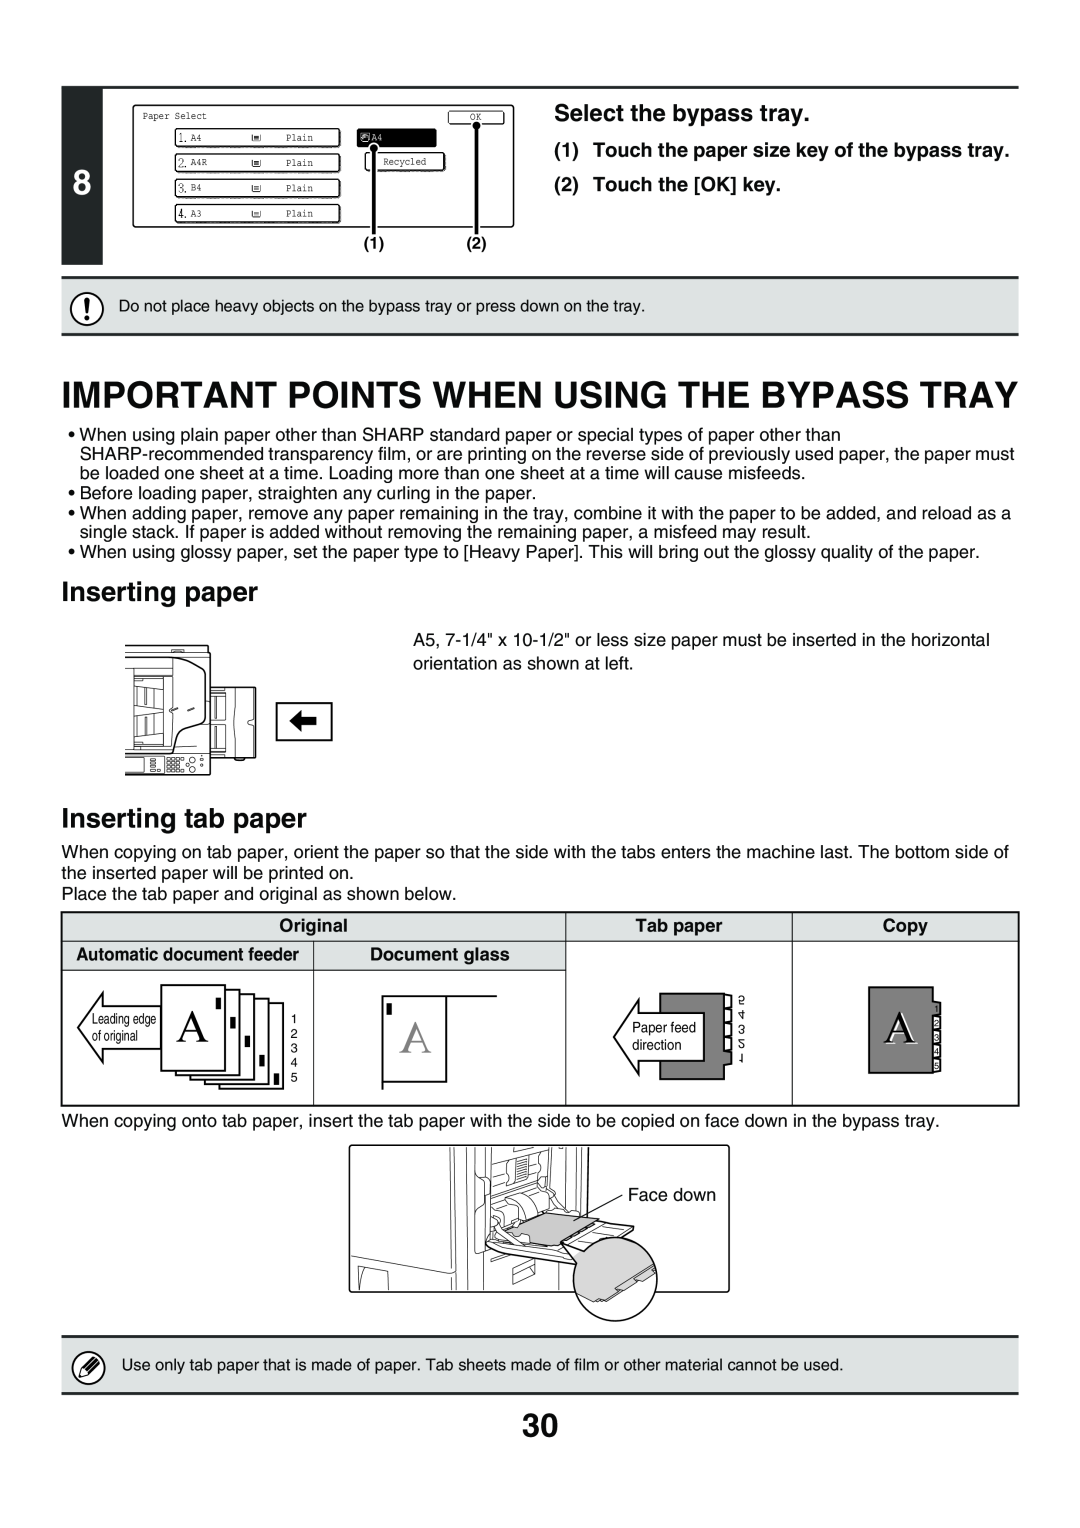 Sharp MX-3500N Important Points When Using The Bypass Tray, Inserting paper, Inserting tab paper, Select the bypass tray 